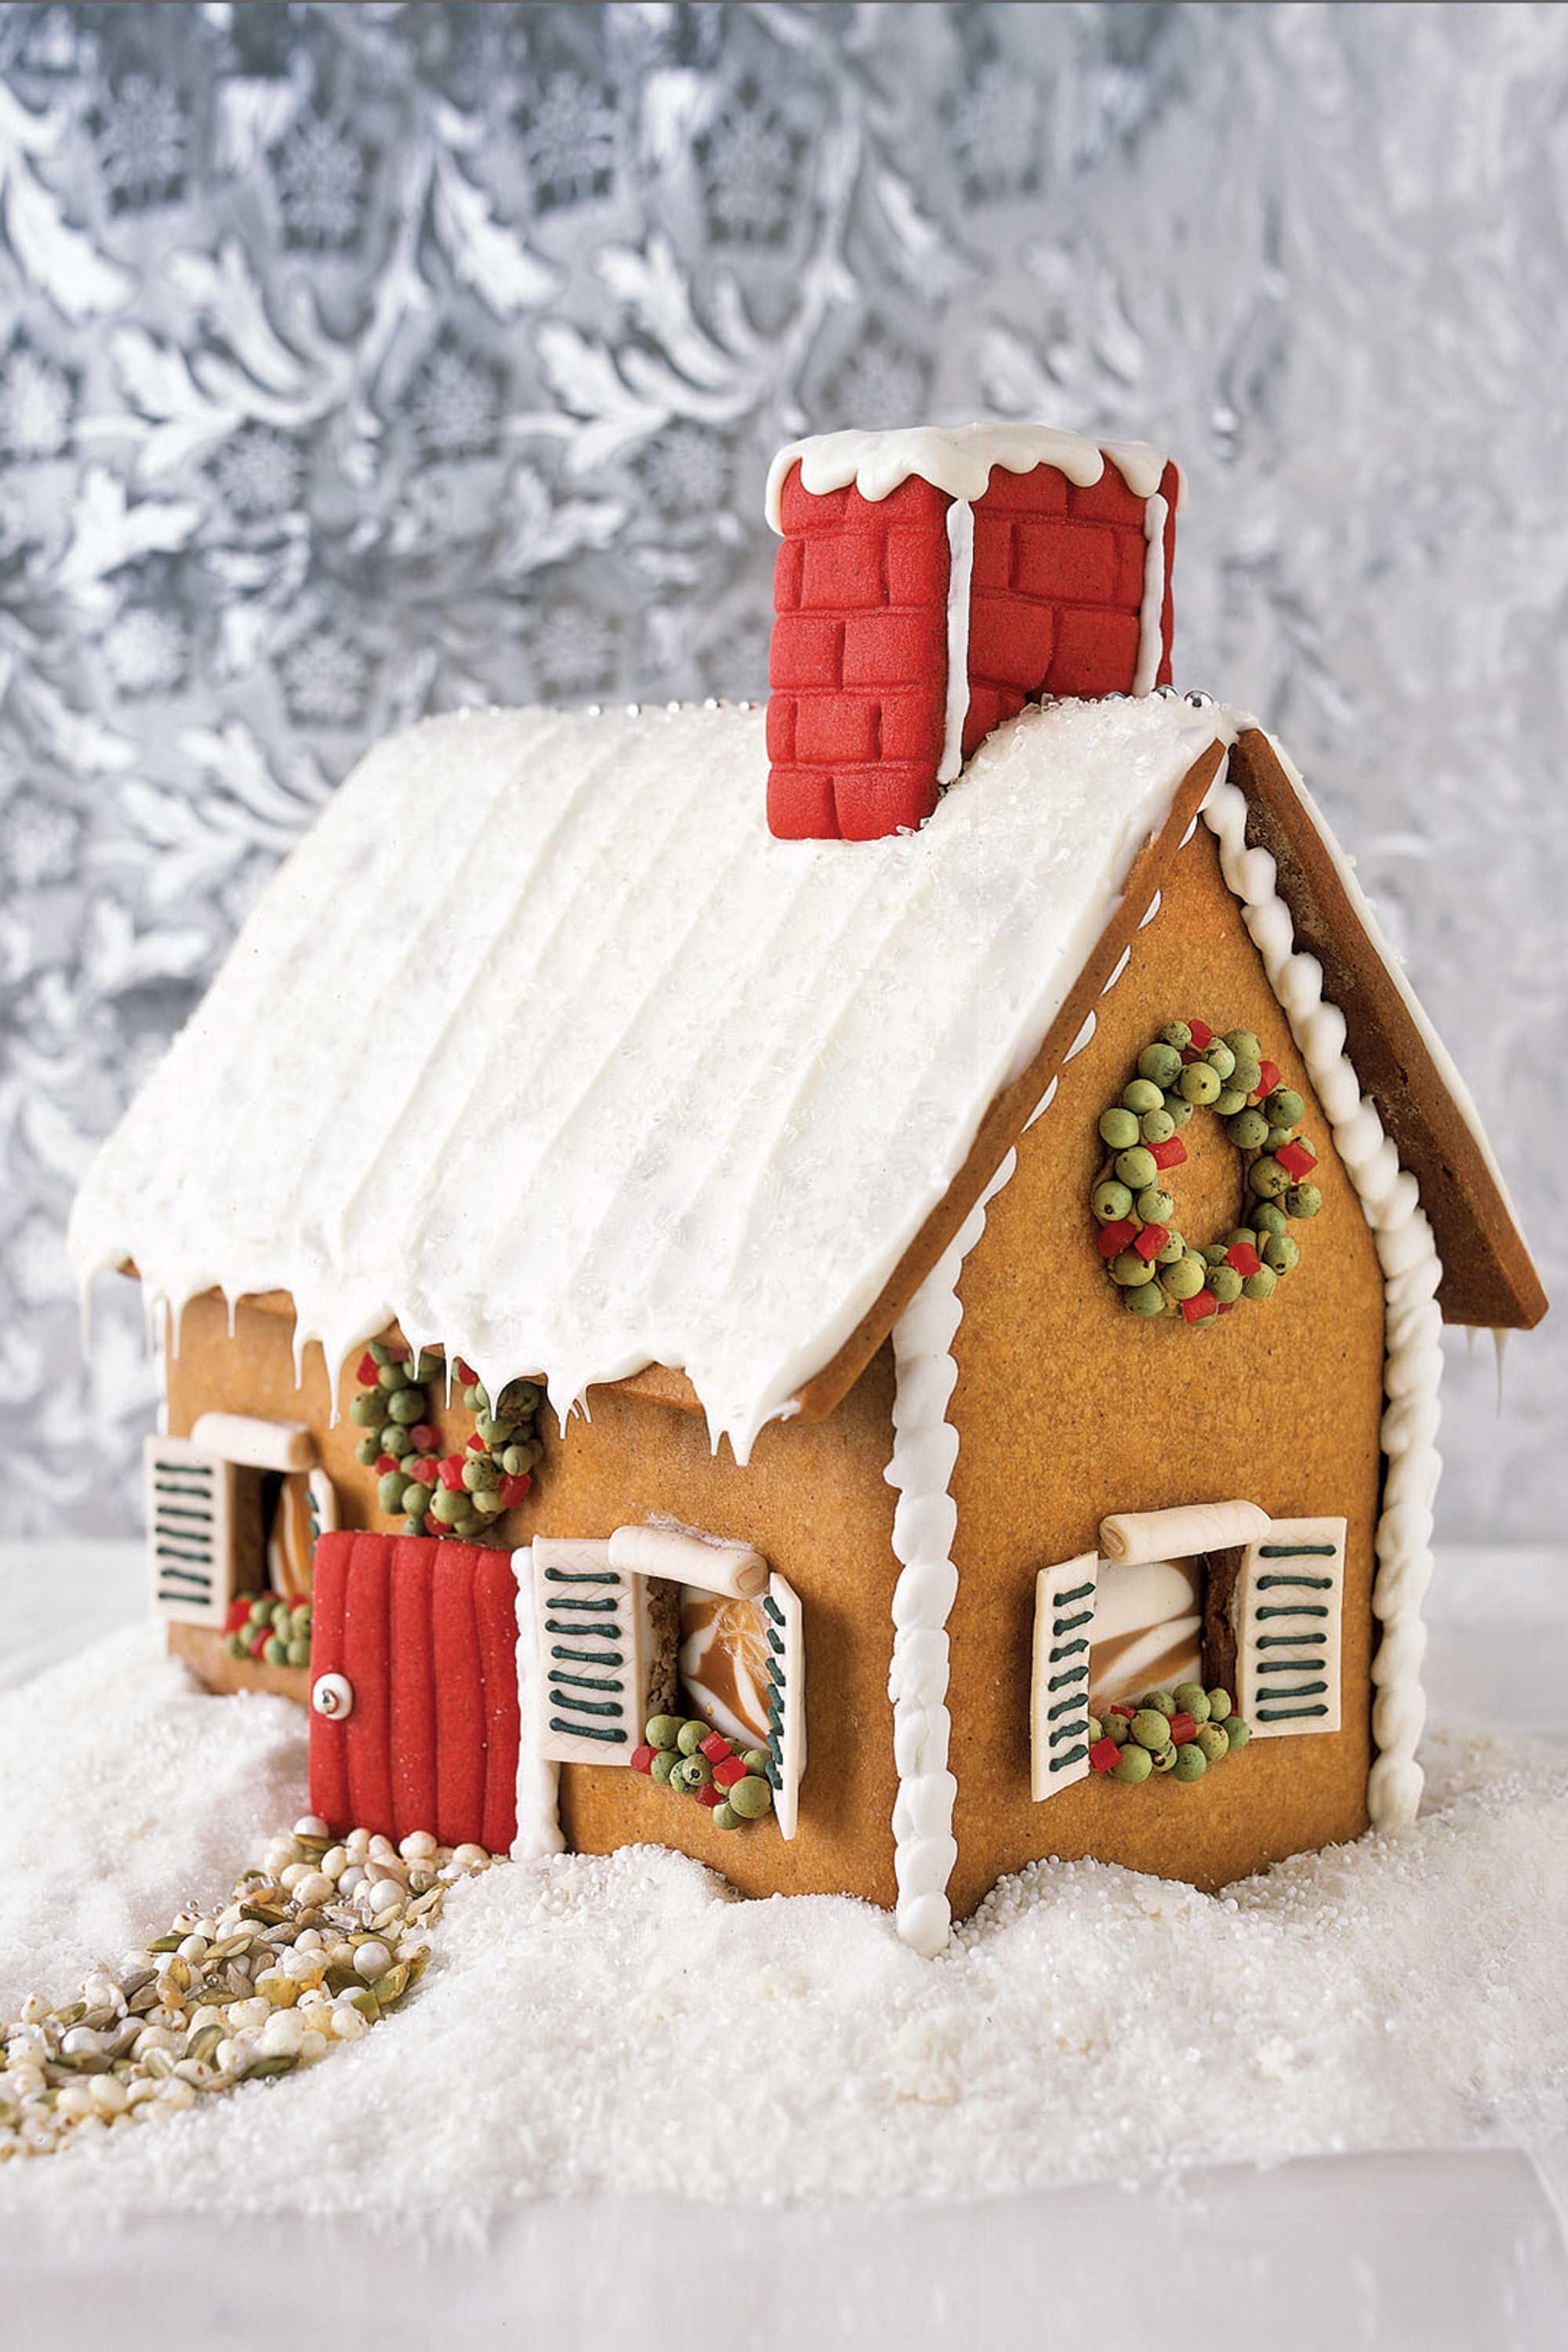 Snowcapped Gingerbread Cabin -   Cristmass Gingerbread and Pretzel Houses Ideas